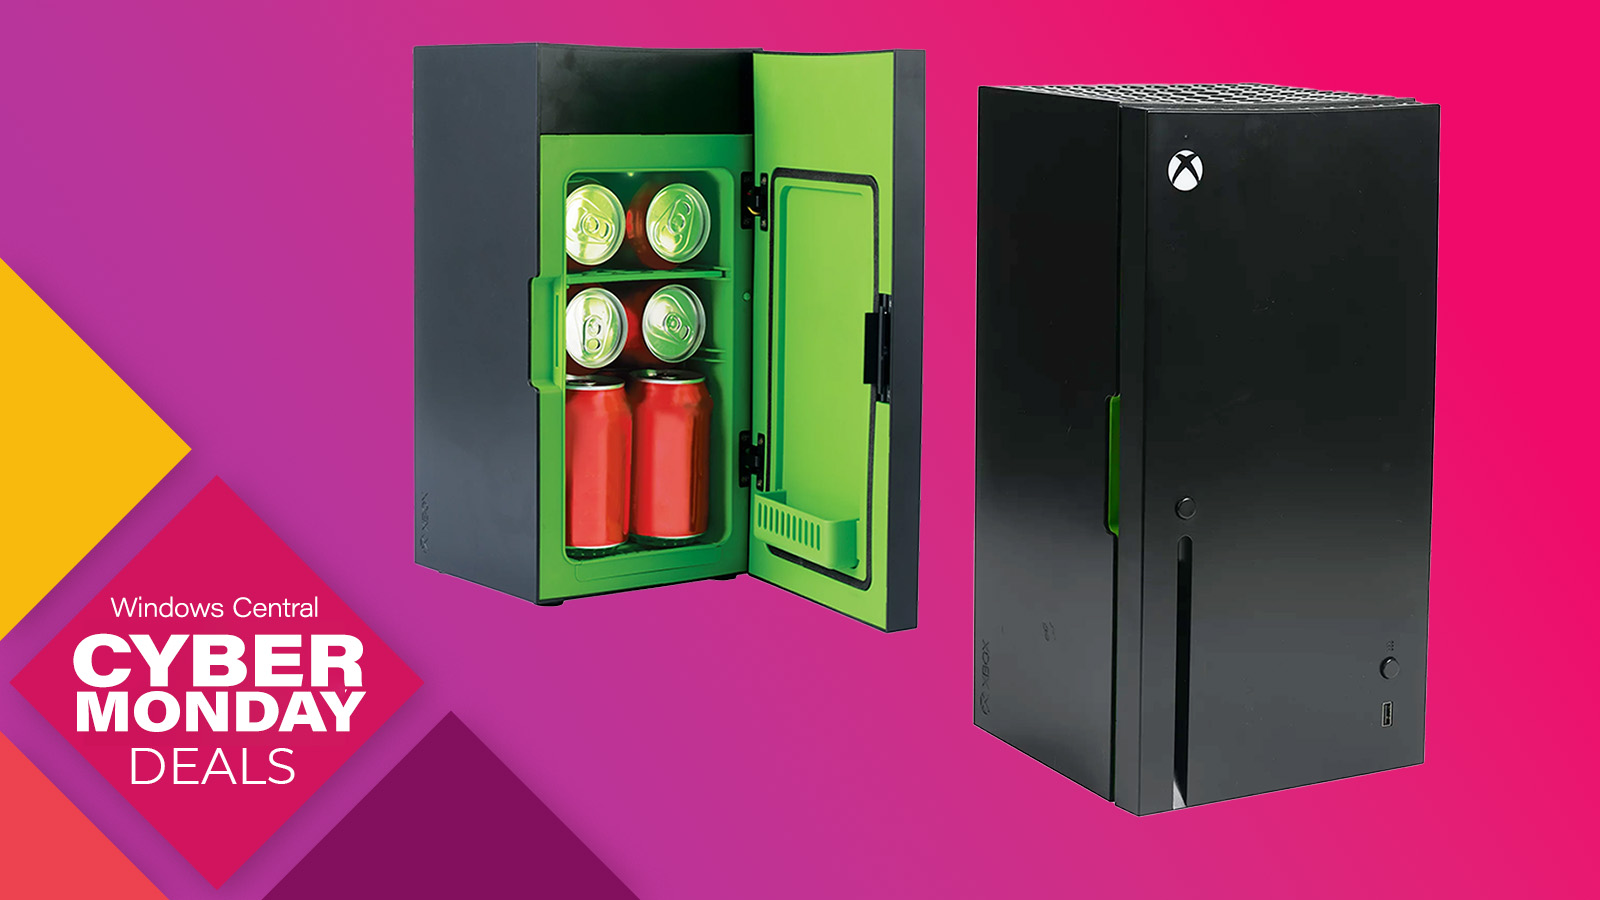 The Xbox Mini Fridge is 45% off for Cyber Monday!